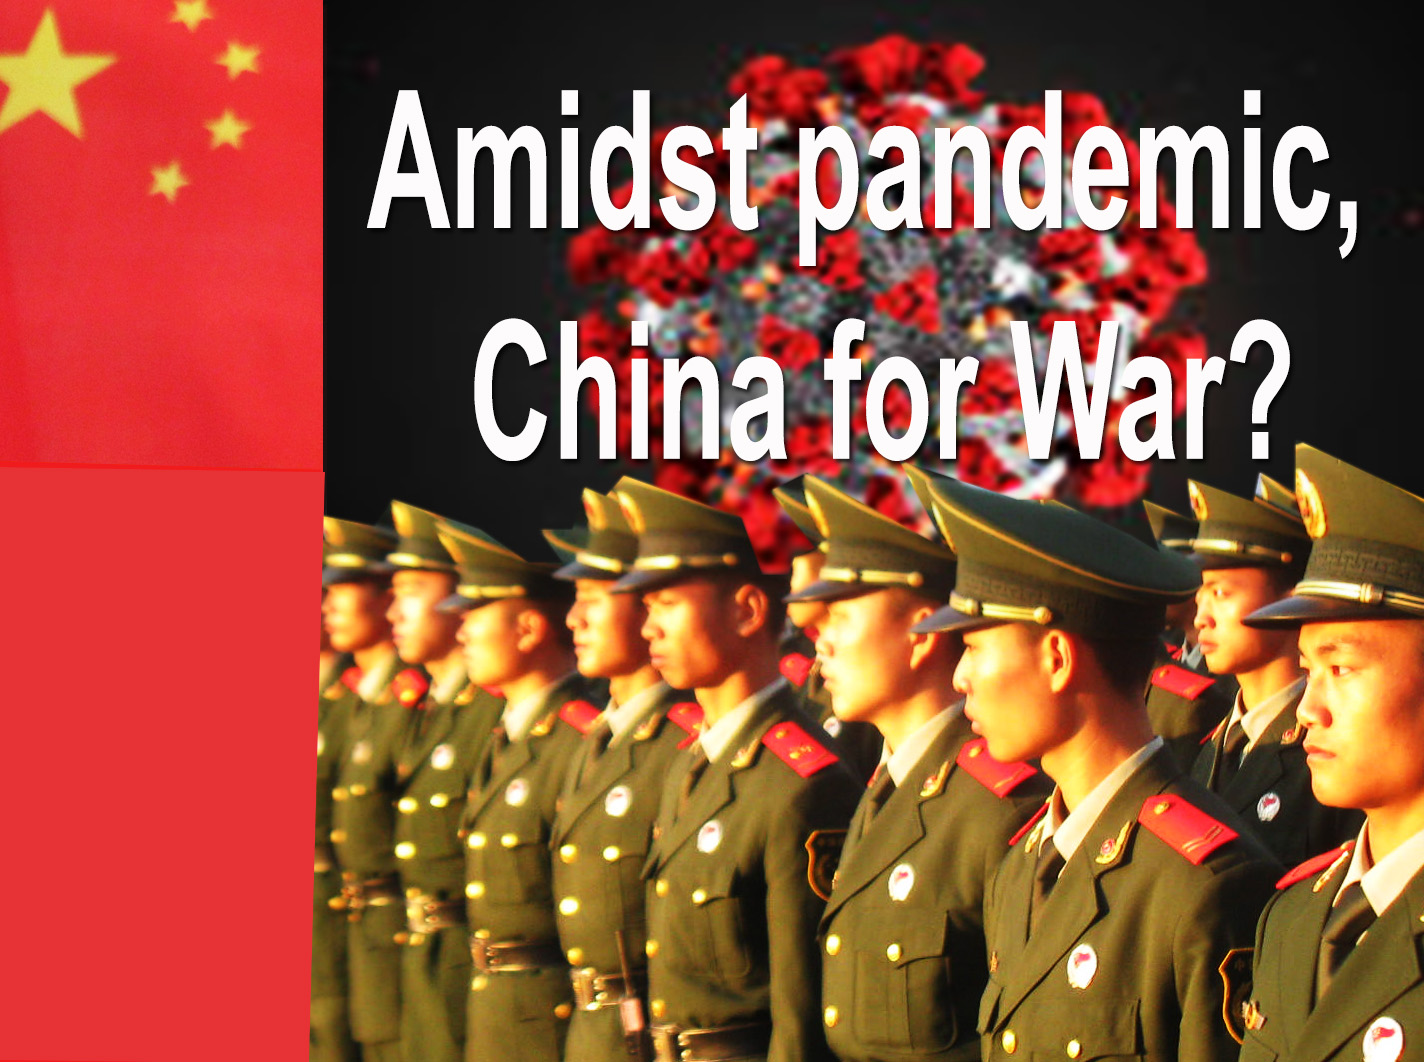 Amidst pandemic, China for War?